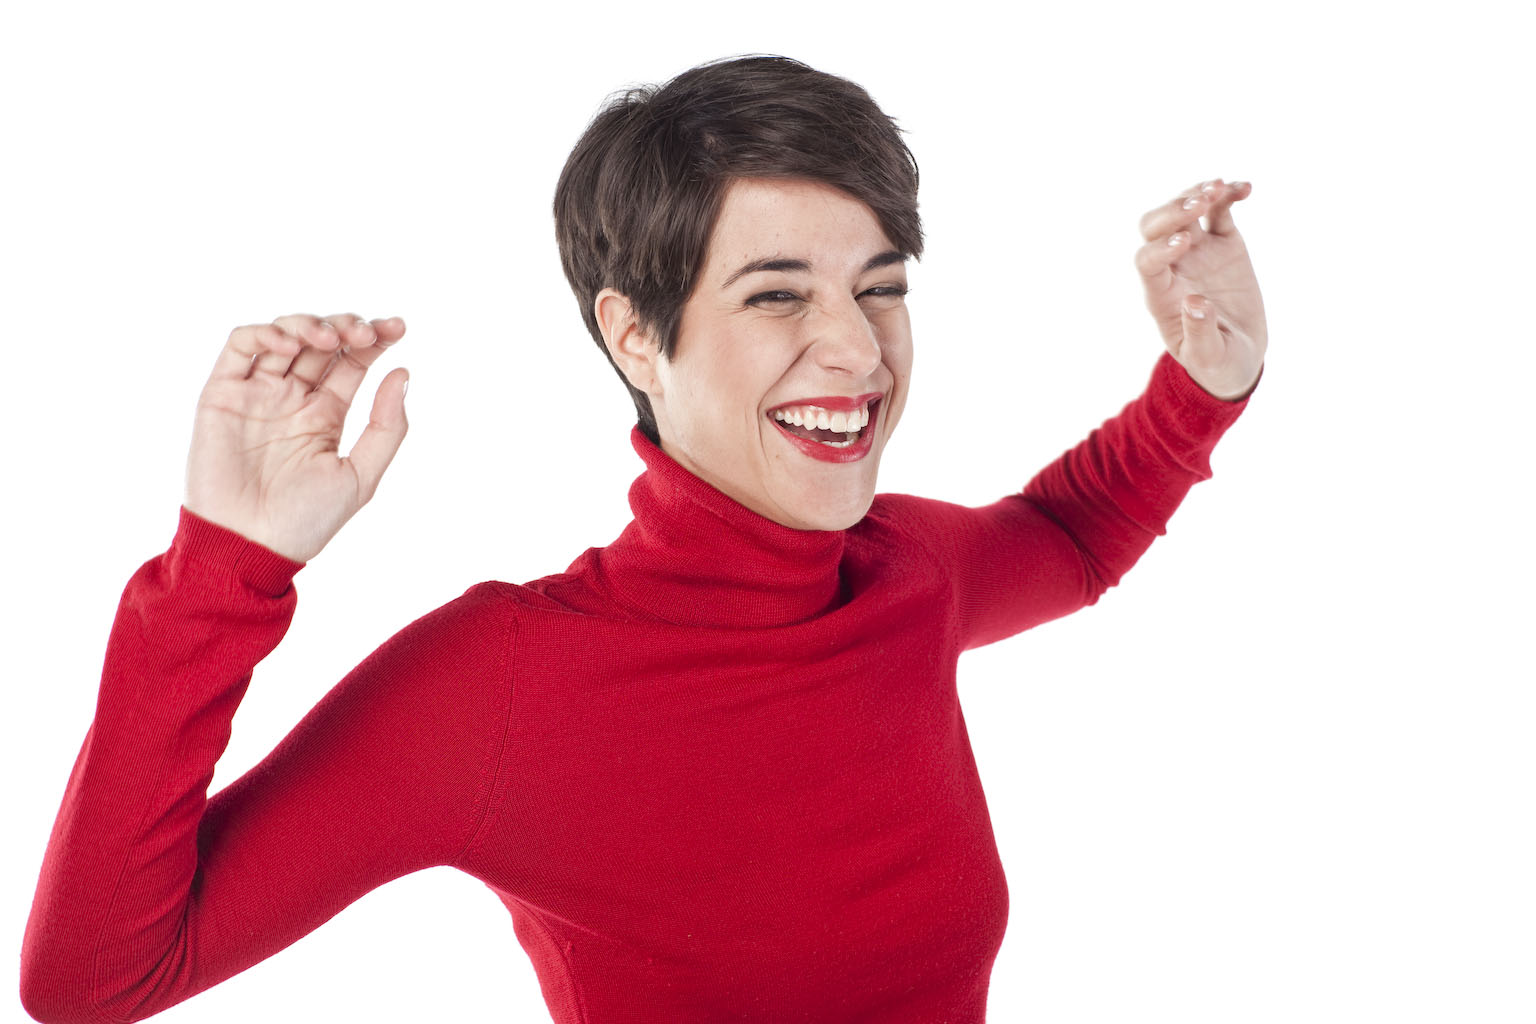 Smiling dancing woman with short brunette hair wearing red lipstick and a red jumper